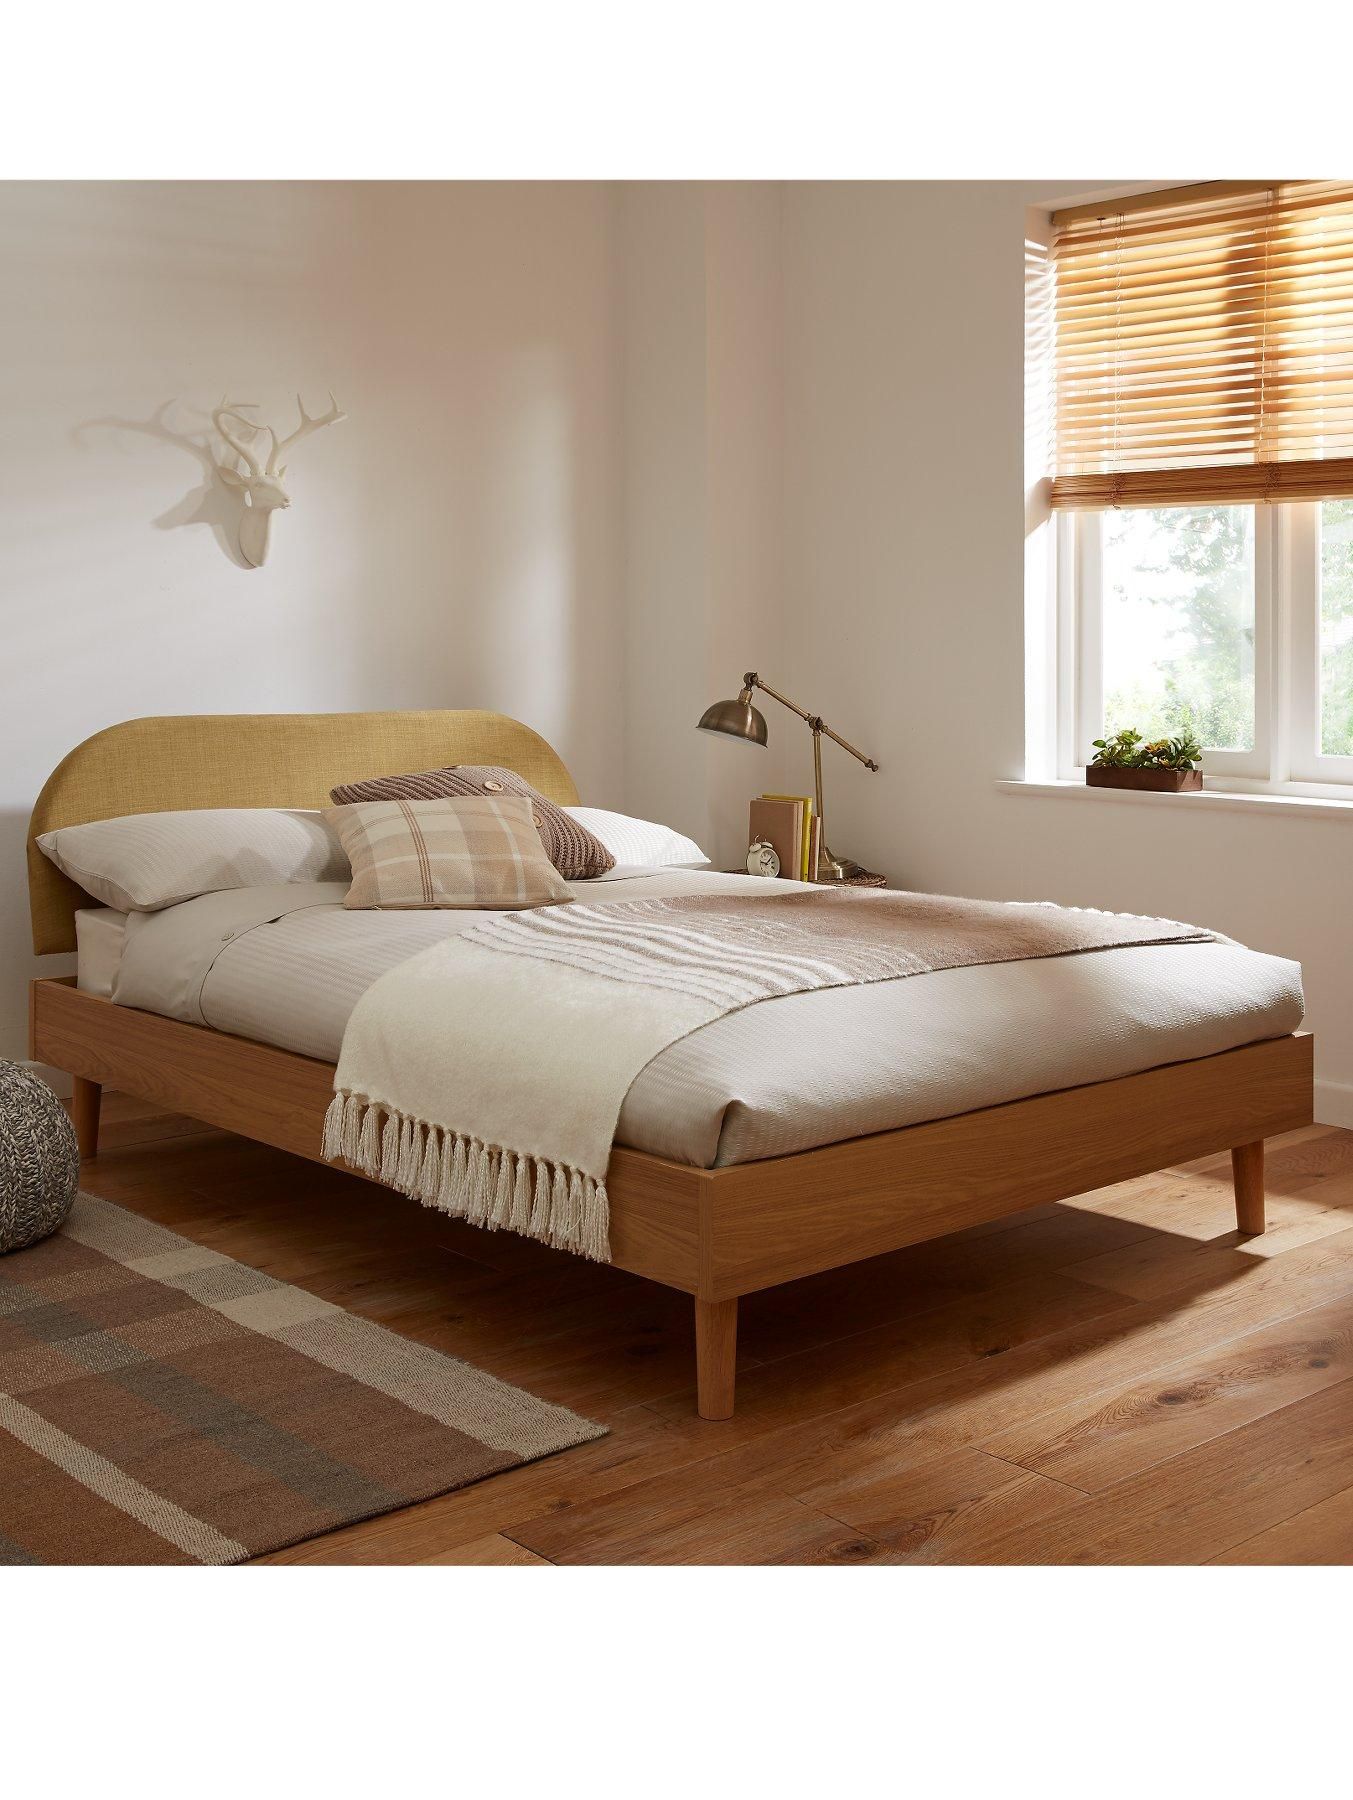 Iconic Scandinavian Bed Frame to Enhance Your Bedroom Decor